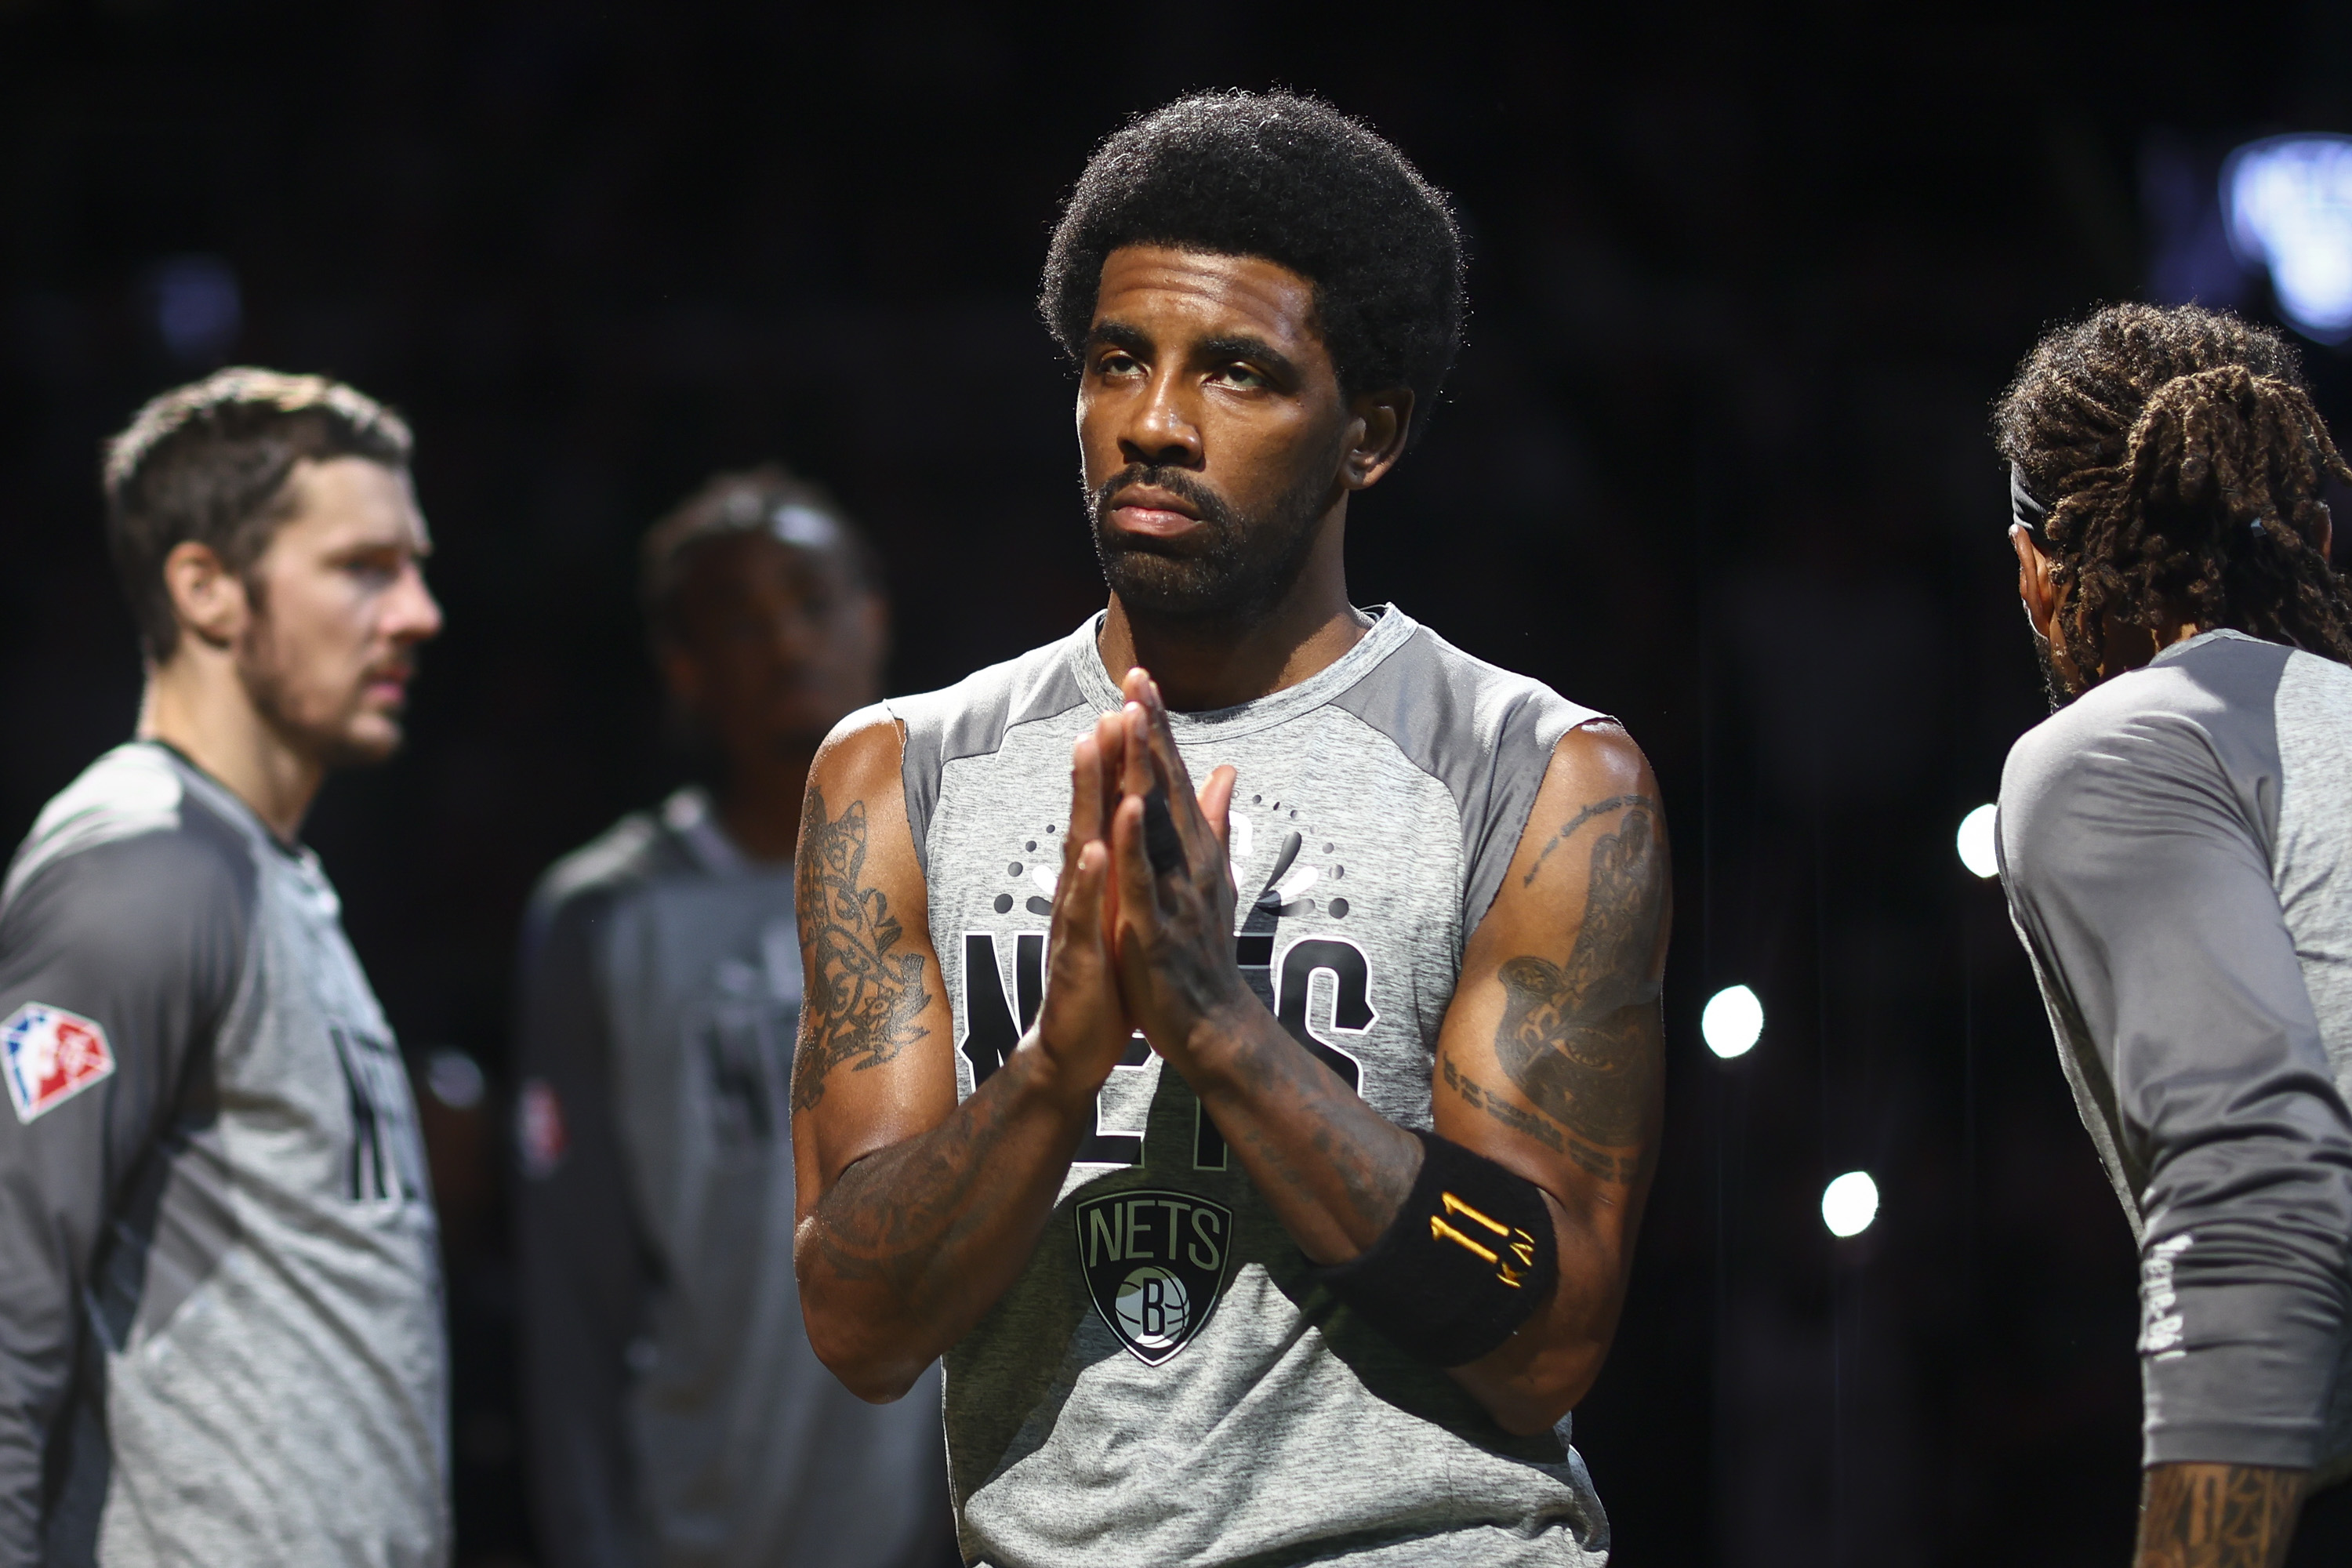 Is Kyrie Irving already gone? Sources say he's preparing to join the Nets –  Boston Herald